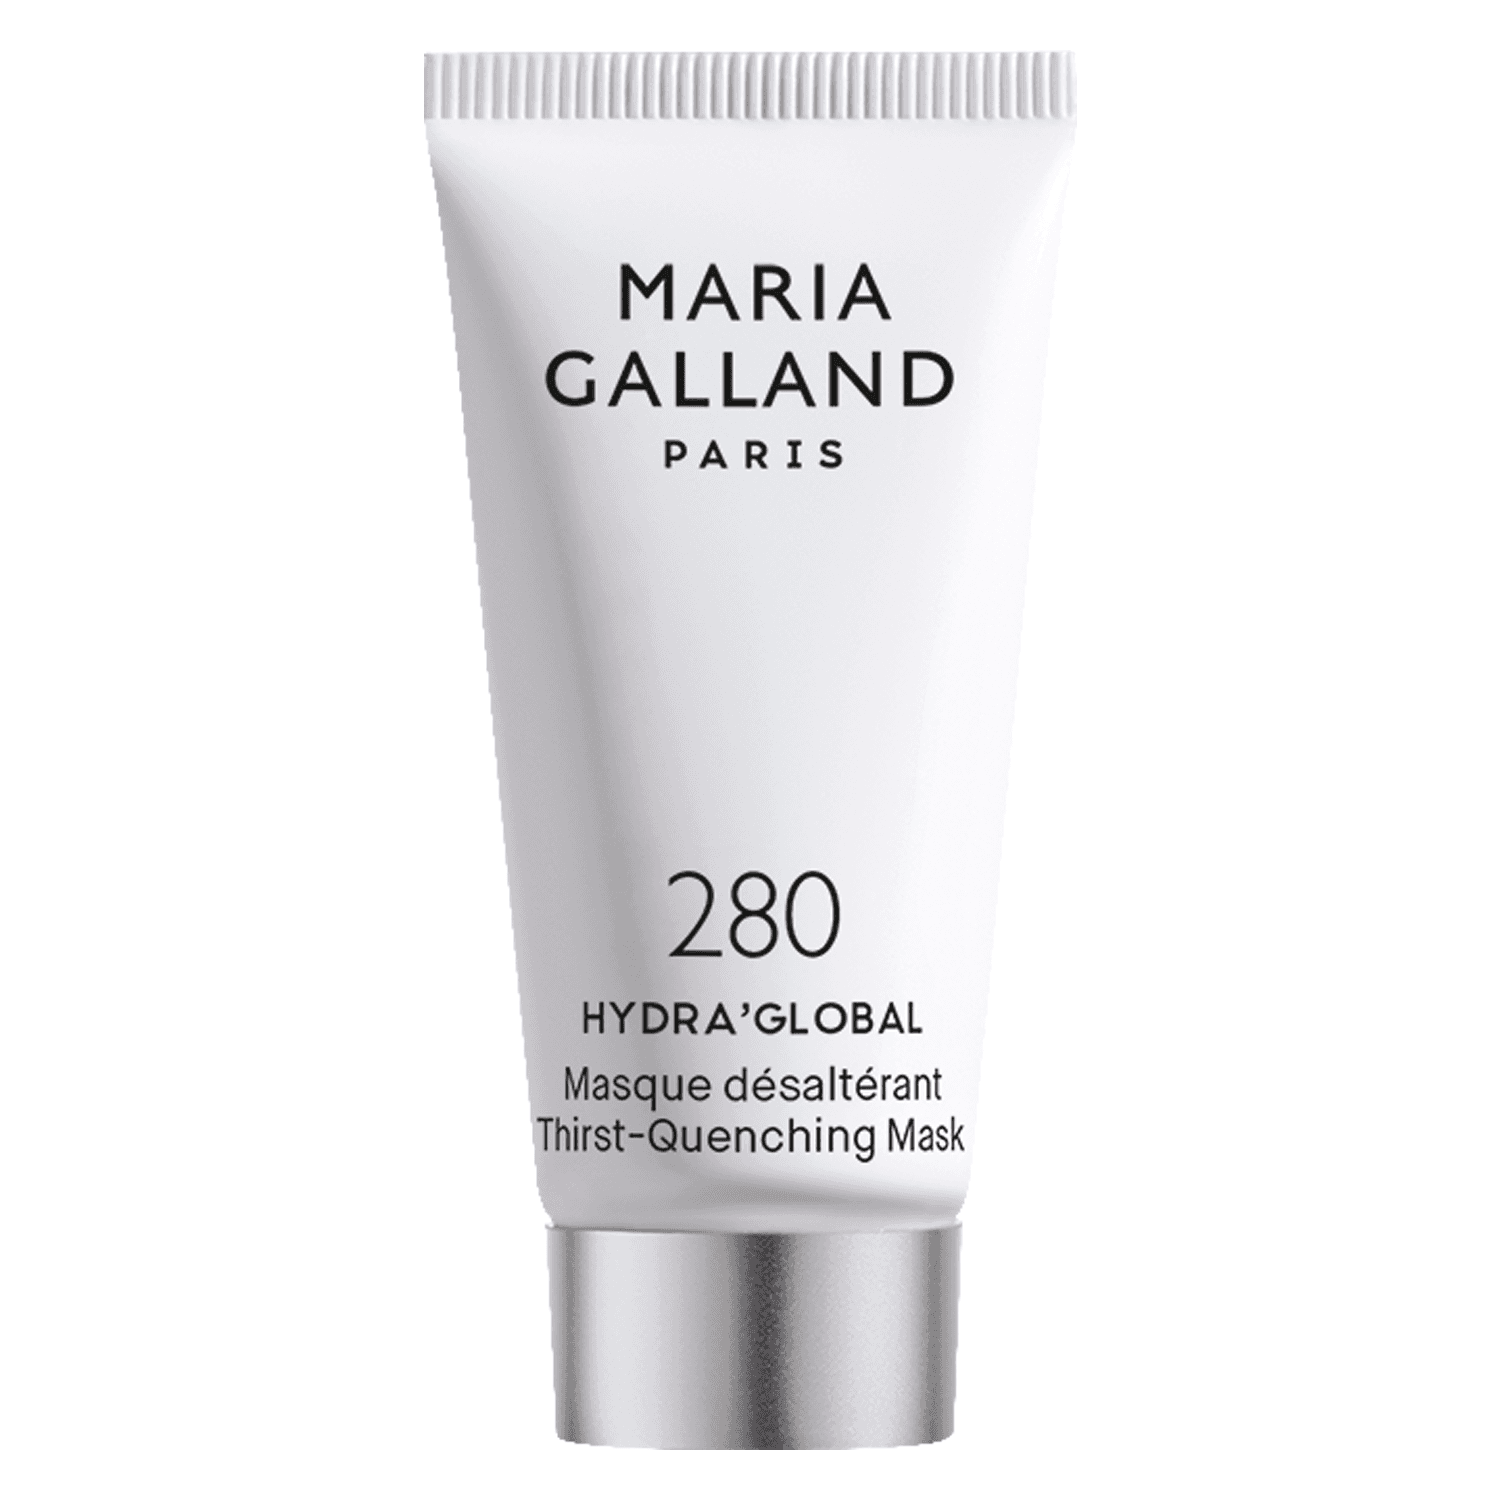 Hydra'Global - 280 Thirst-Quenching Mask